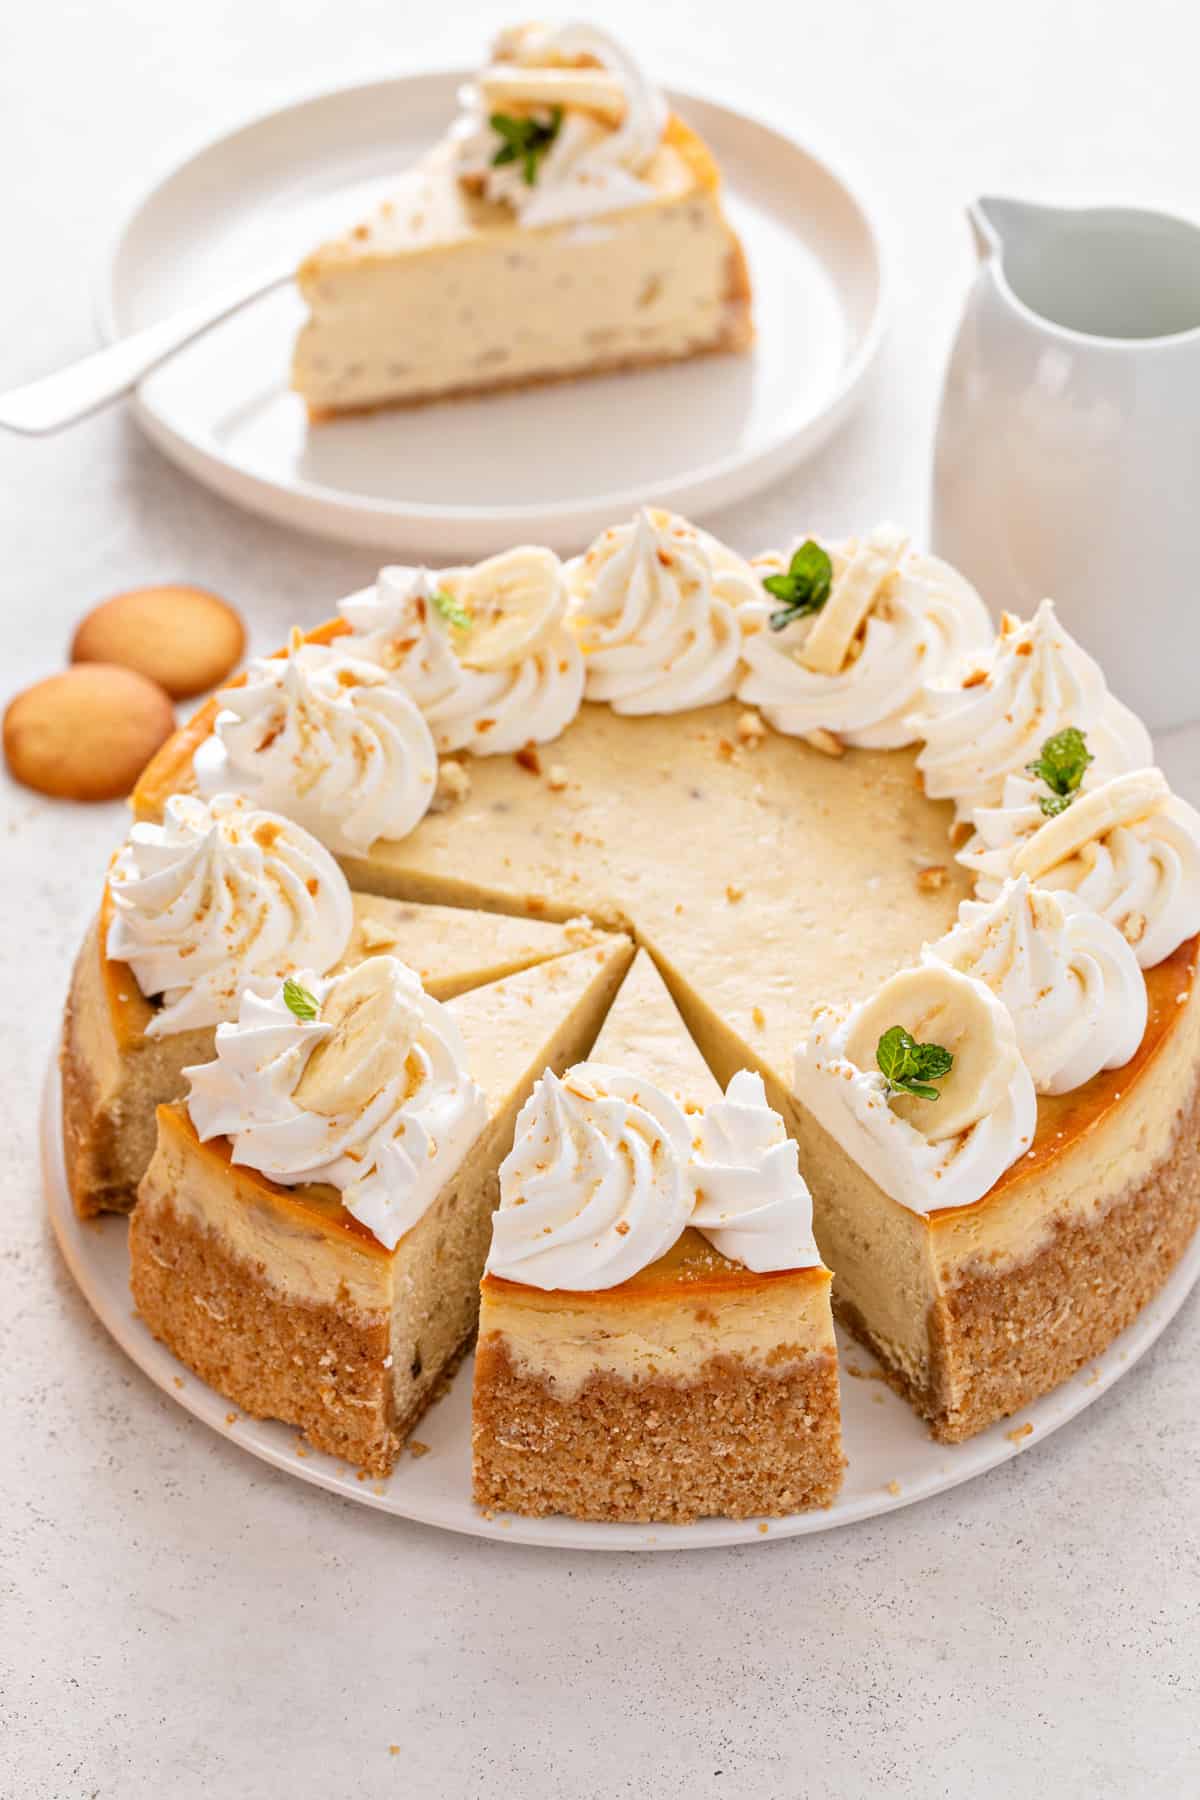 Sliced banana pudding cheesecake topped with whipped cream and fresh banana slices.